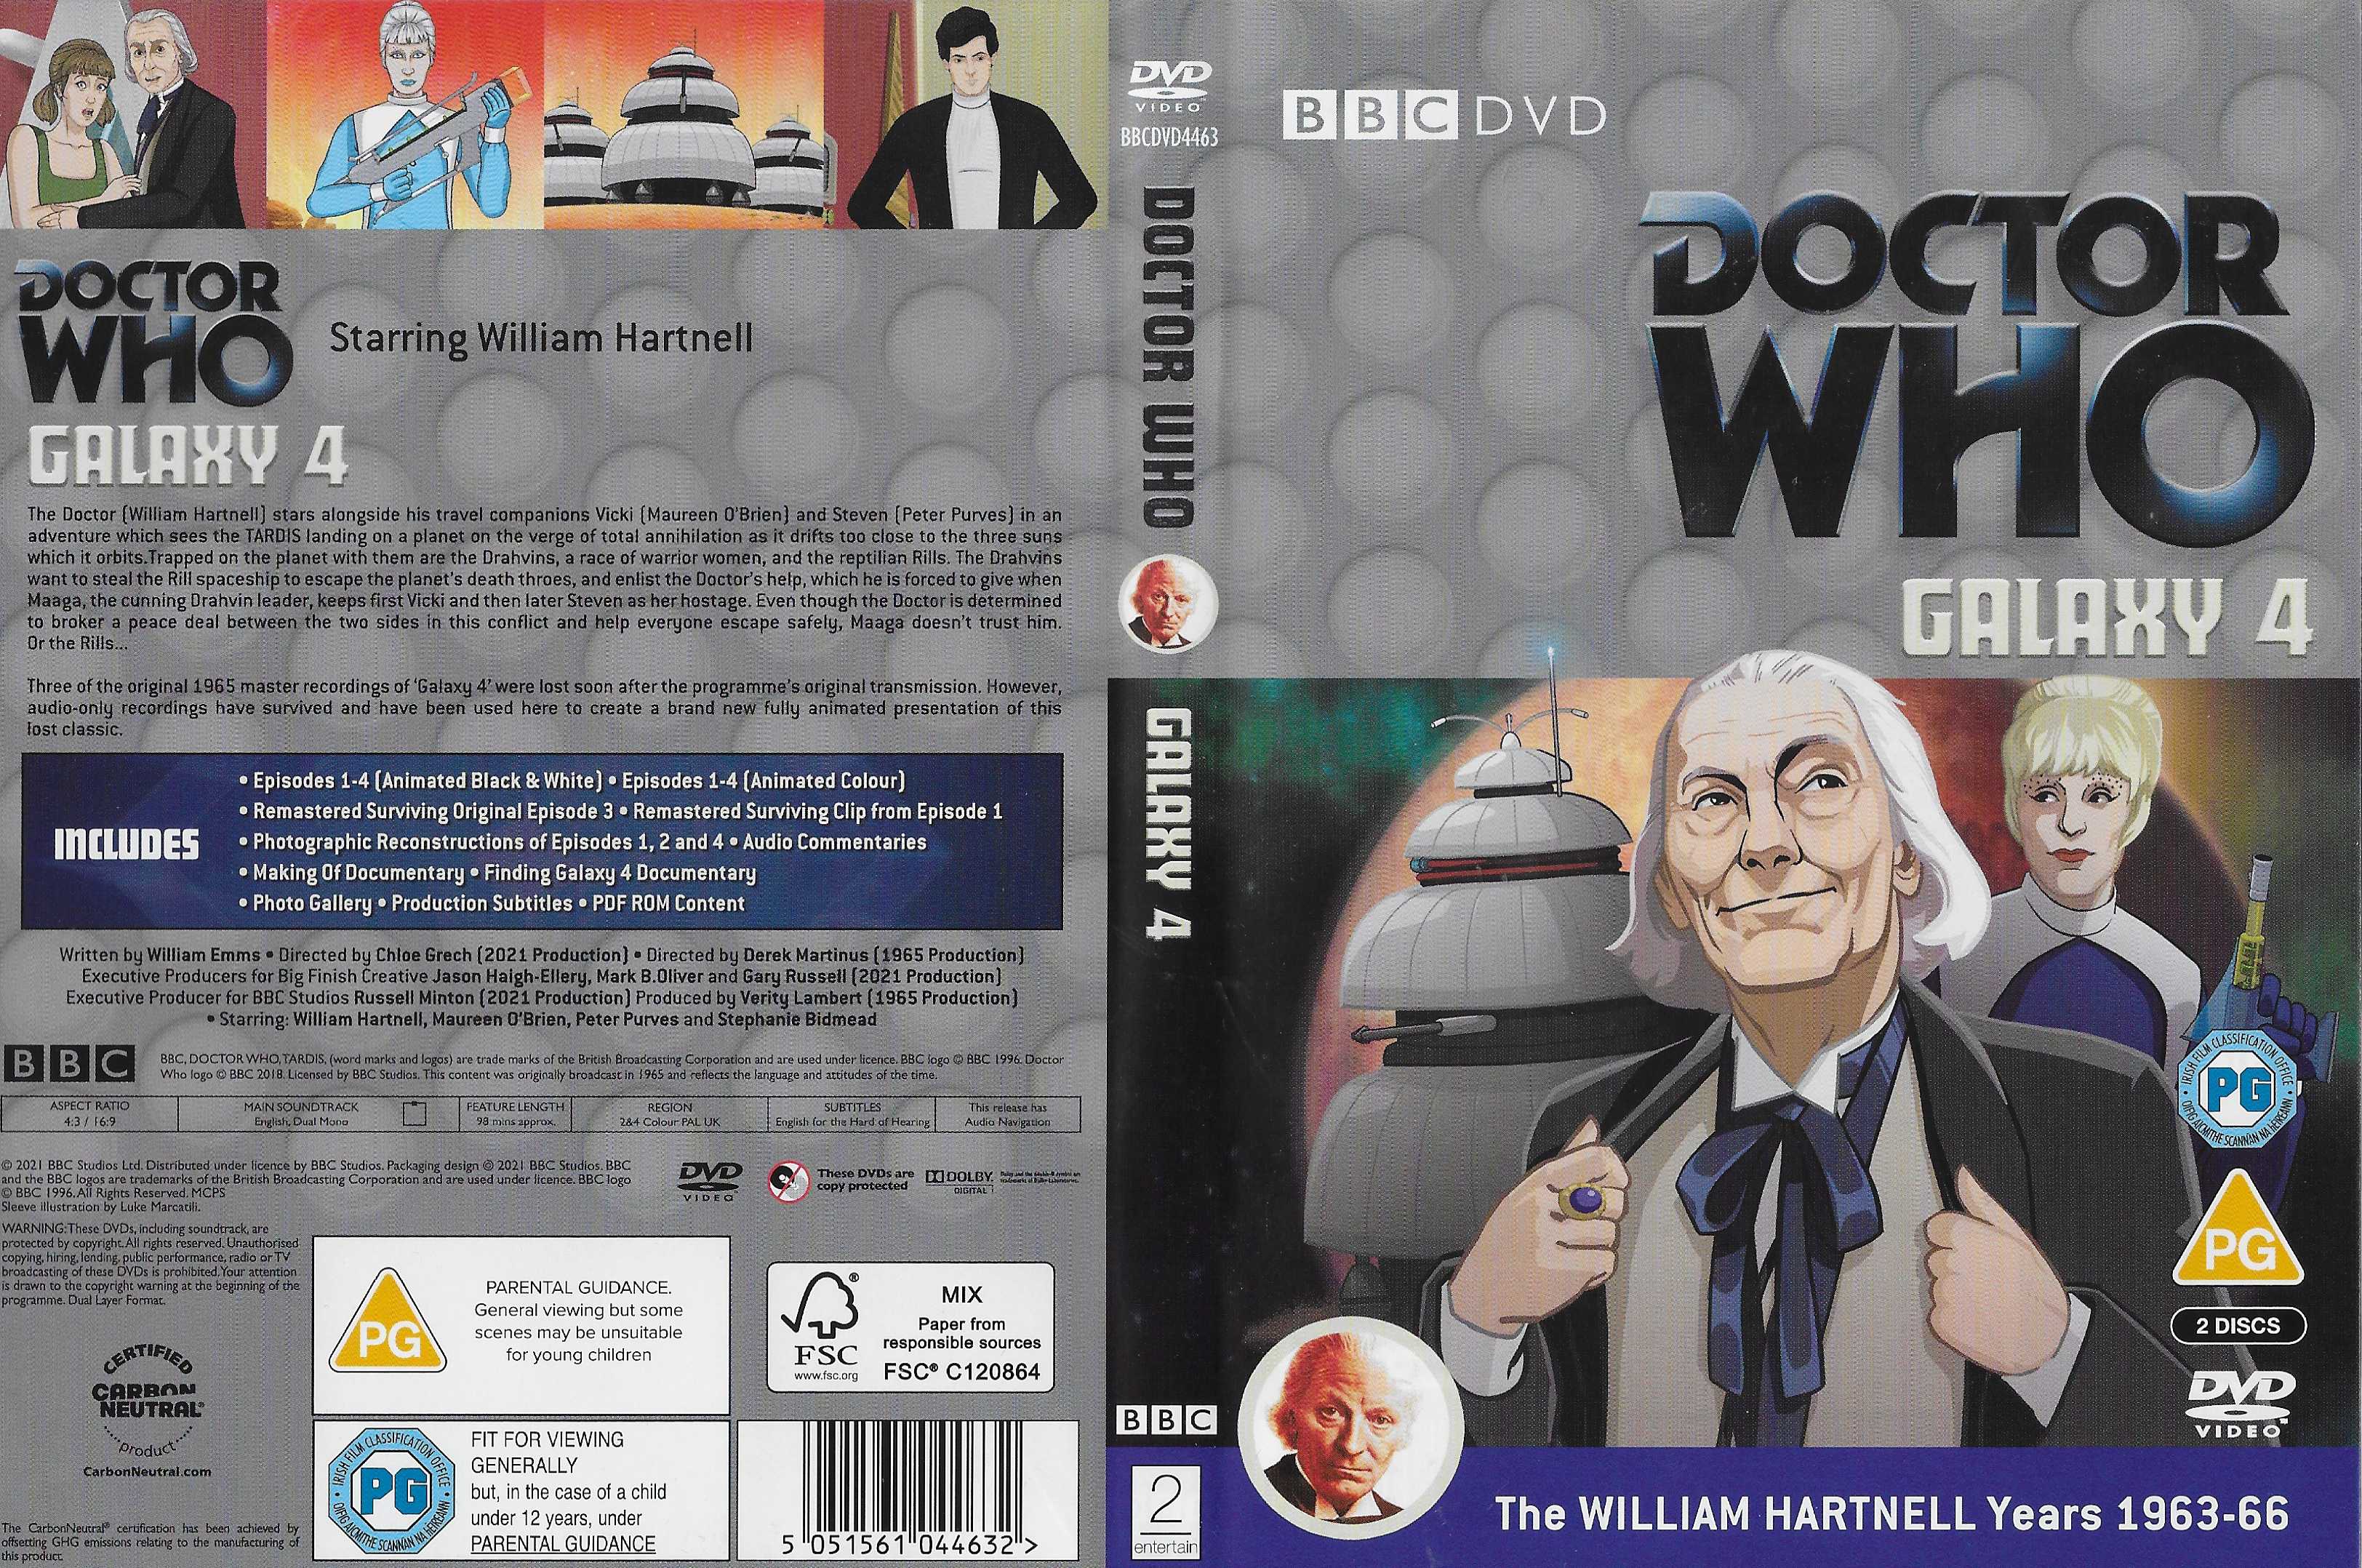 Inserts from BBCDVD 4463